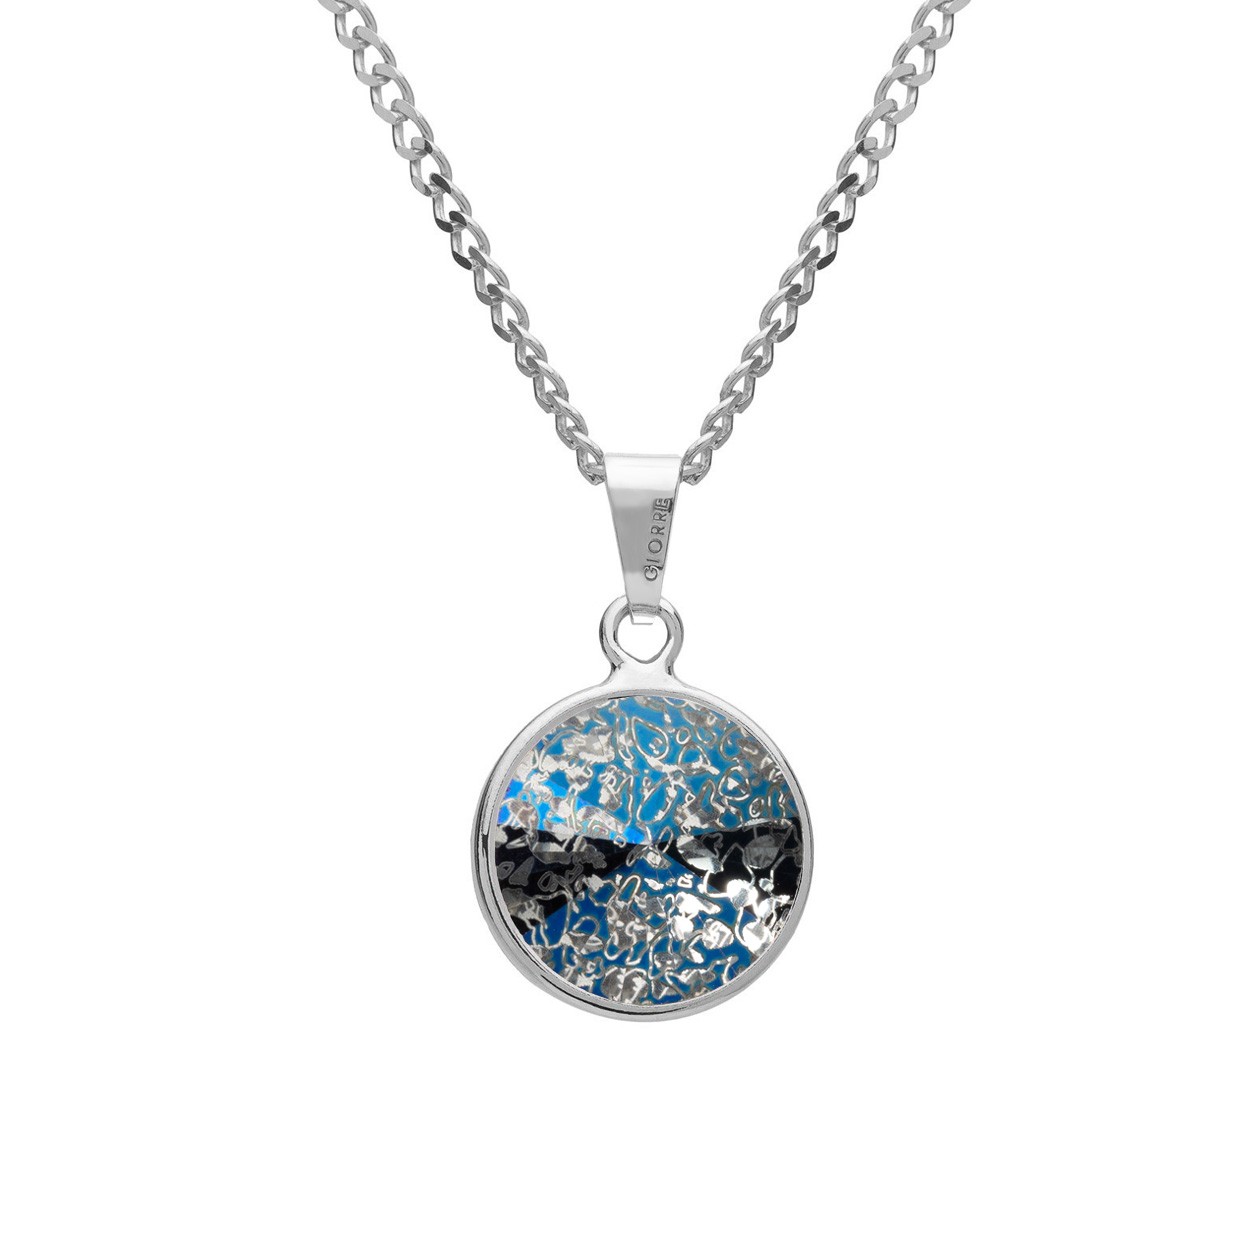 Necklace with natural stone, sterling silver 925